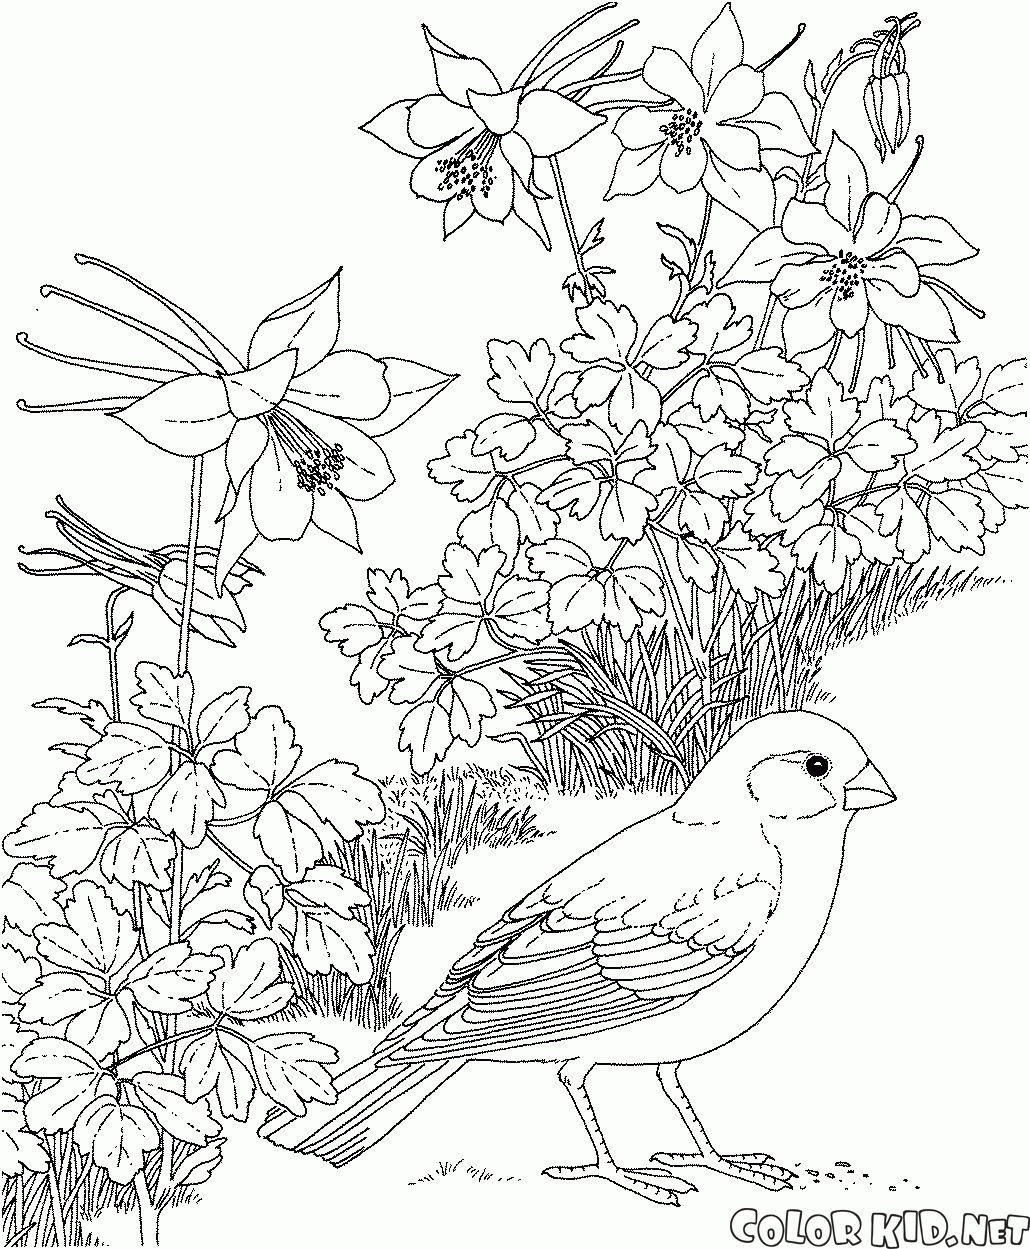 Coloring page - Oatmeal